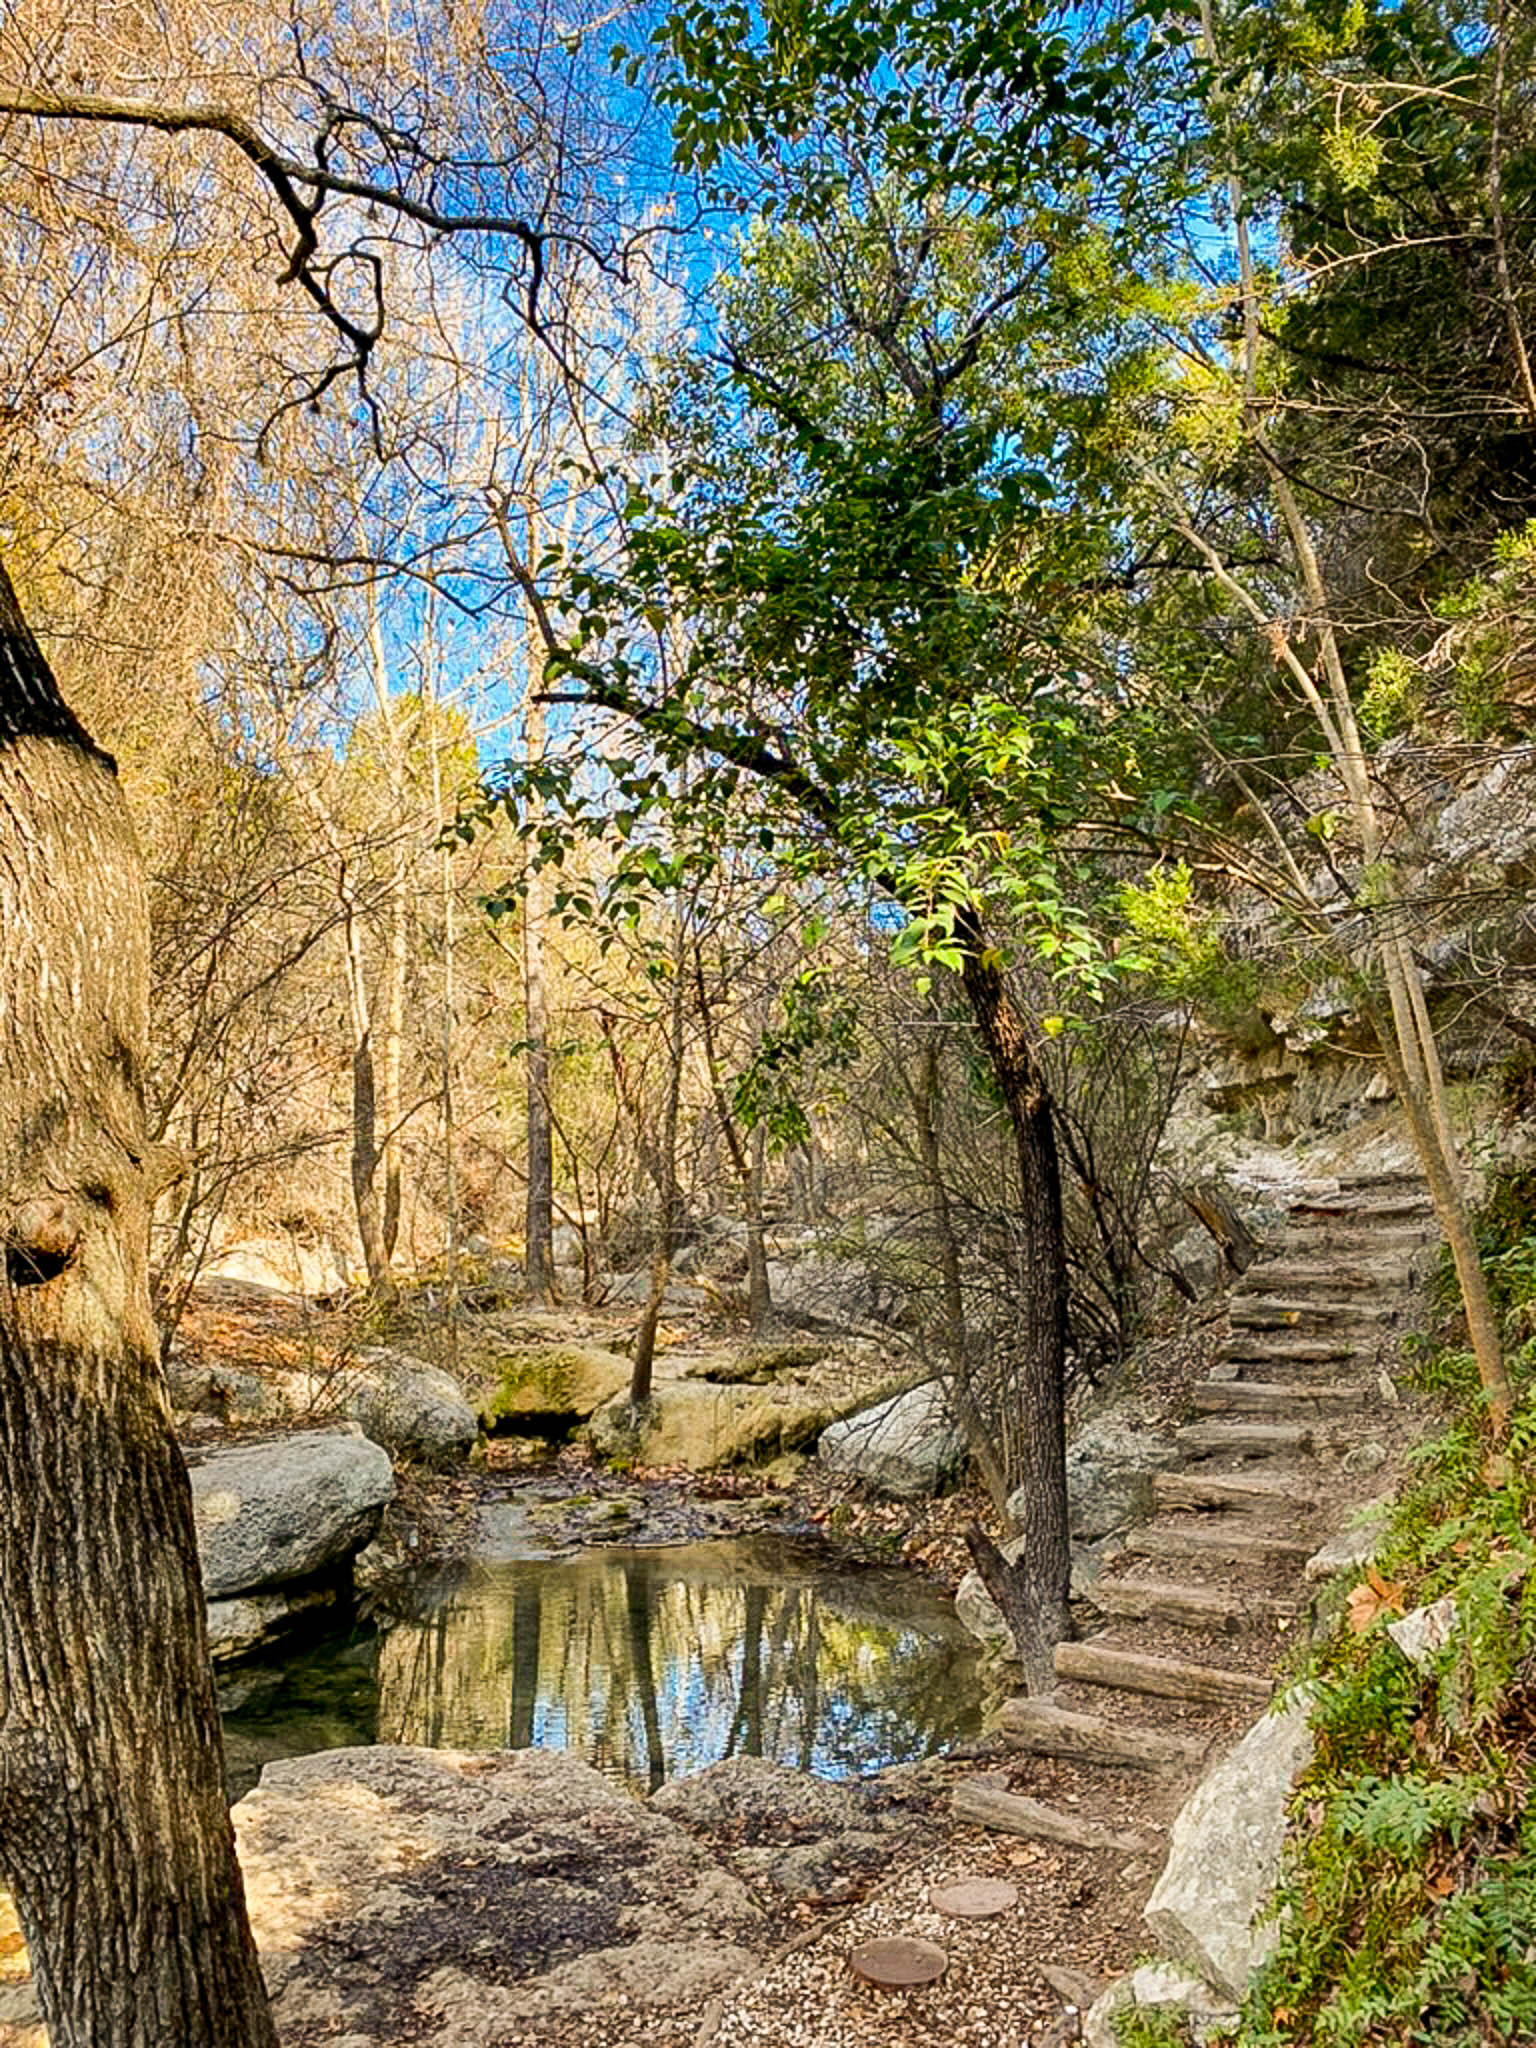 HIKING IN AUSTIN - 101 free things to do in ATX!